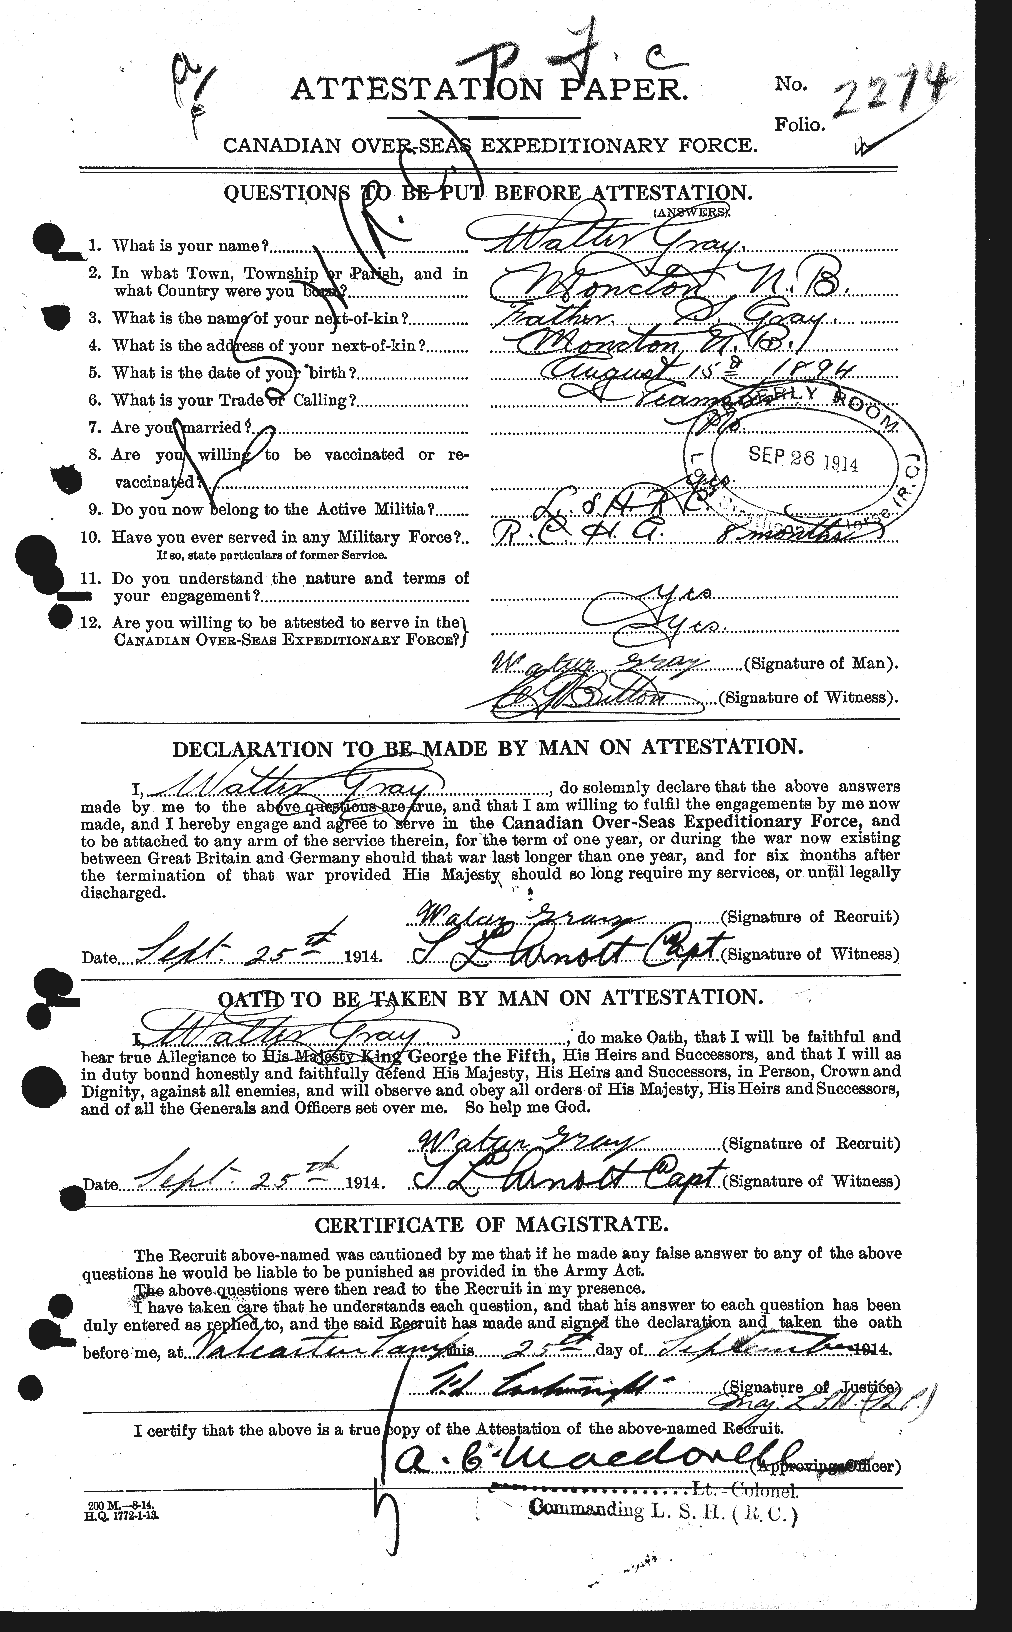 Personnel Records of the First World War - CEF 361740a